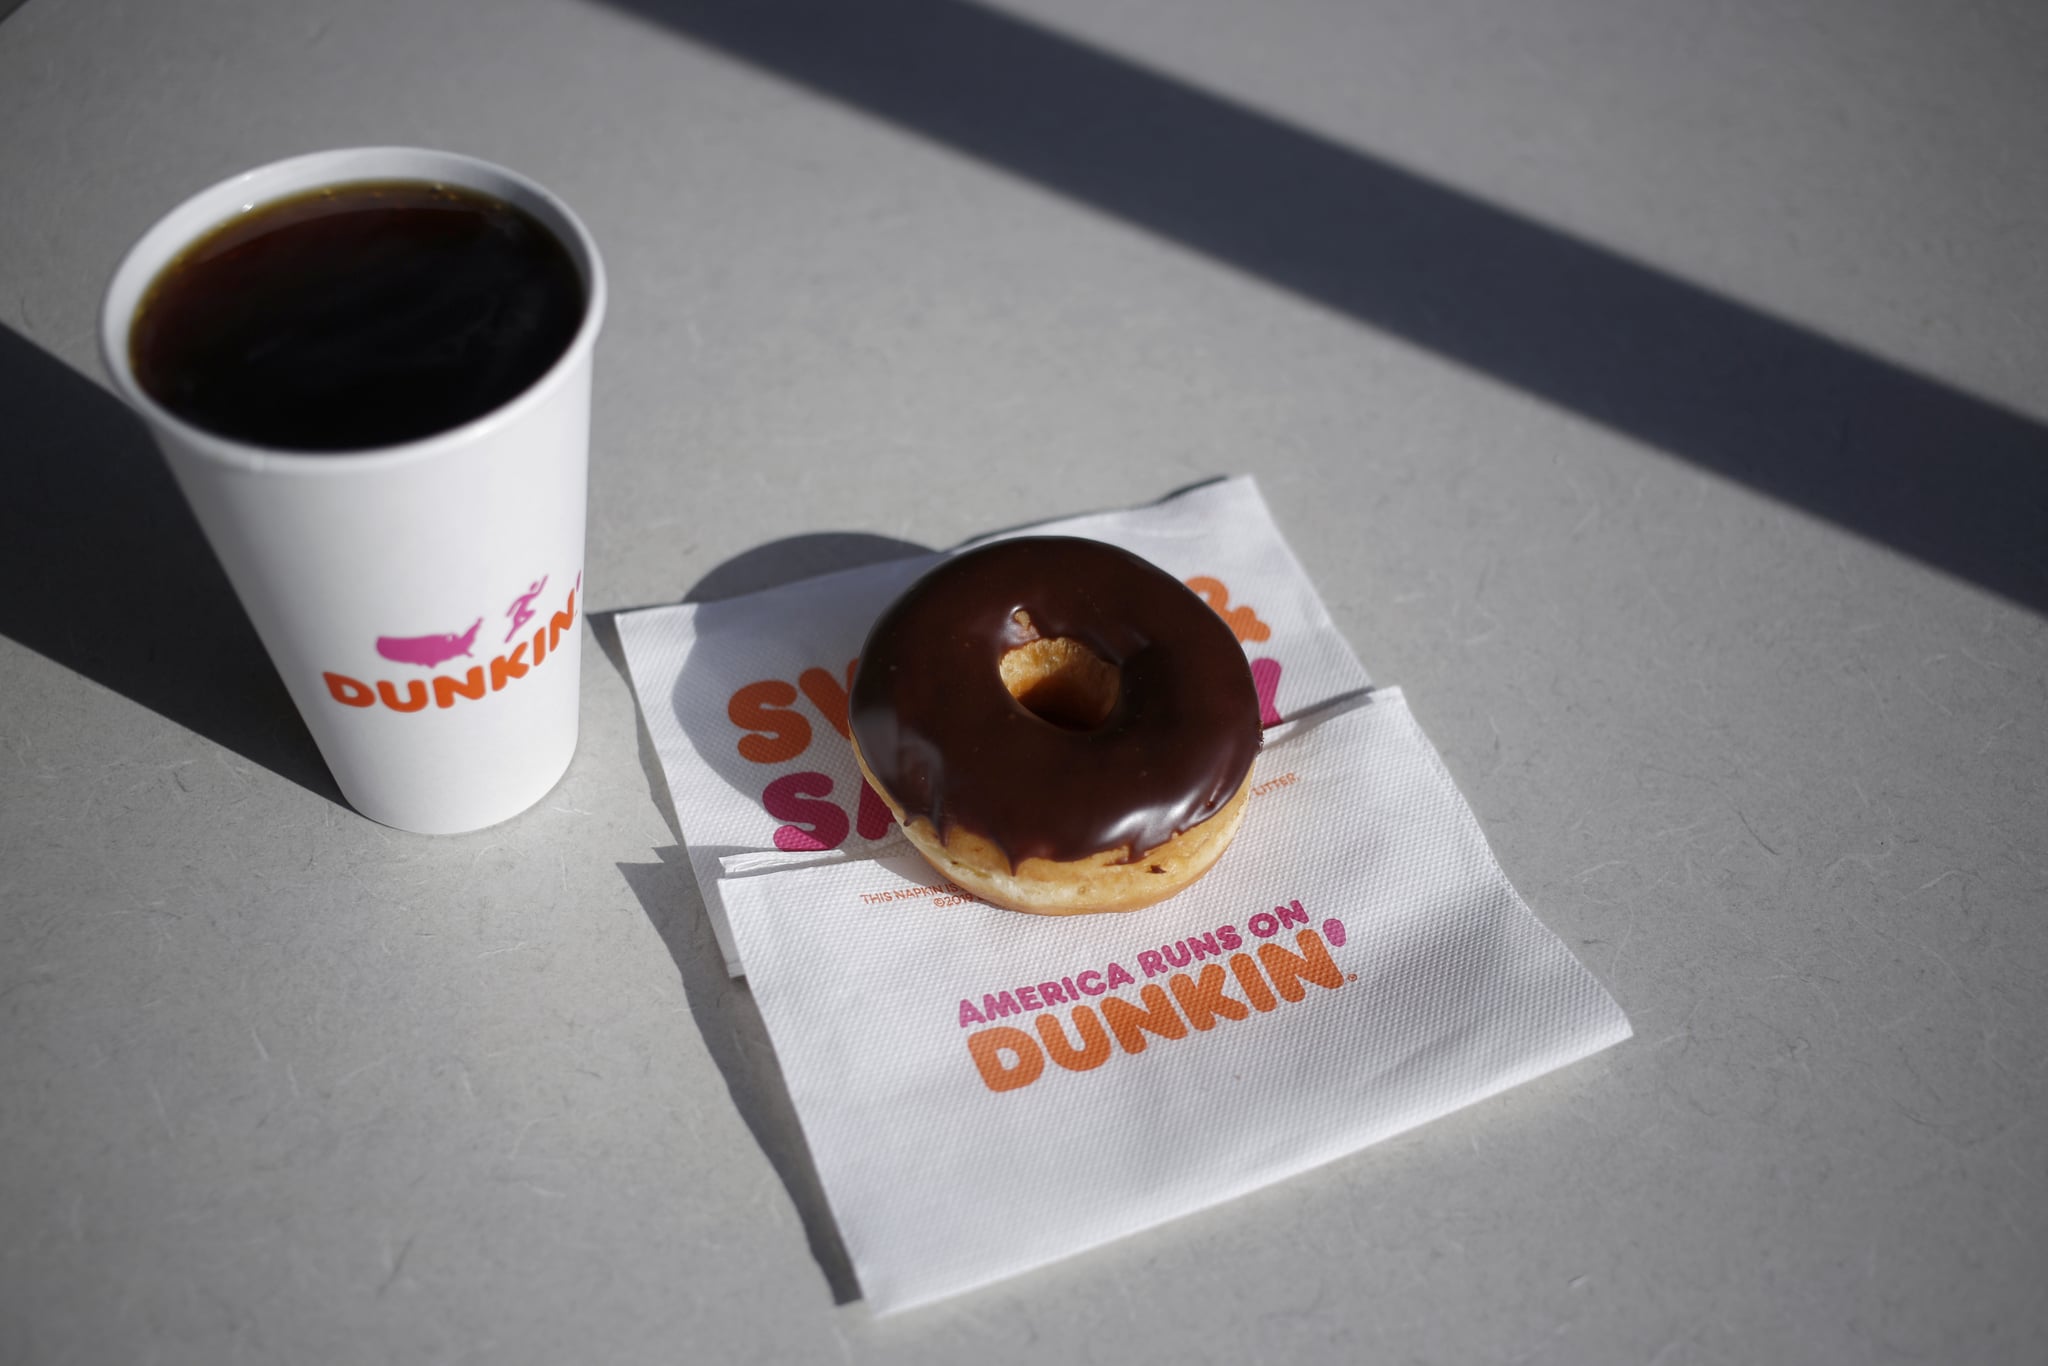 A black coffee and chocolate frosted donut are arranged for a photograph inside a Dunkin' location in Mount Washington, Kentucky, U.S., on Thursday, Jan. 30, 2020. Dunkin' Brands Group Inc. is scheduled to release earnings figures on Feb. 6. Photographer: Luke Sharrett/Bloomberg via Getty Images